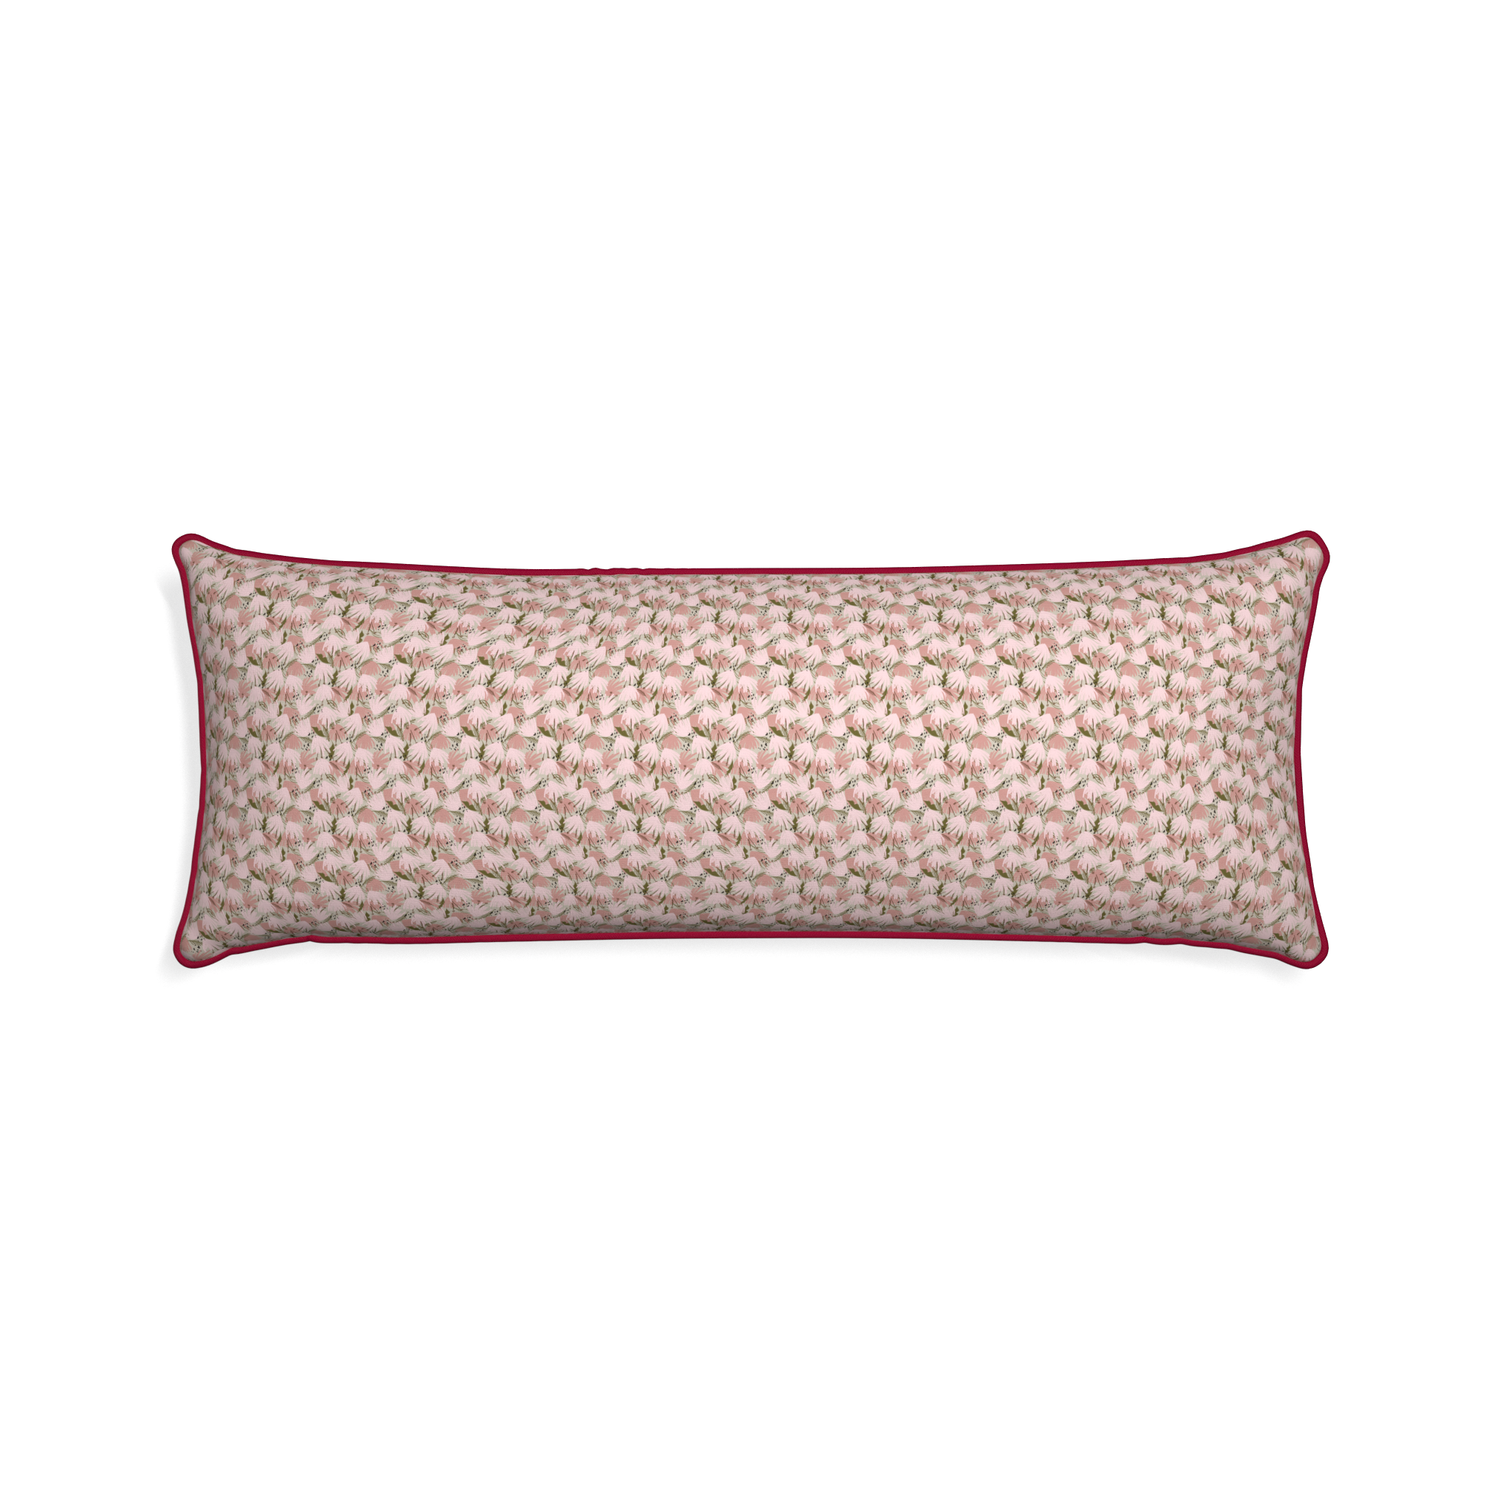 Xl-lumbar eden pink custom pink floralpillow with raspberry piping on white background